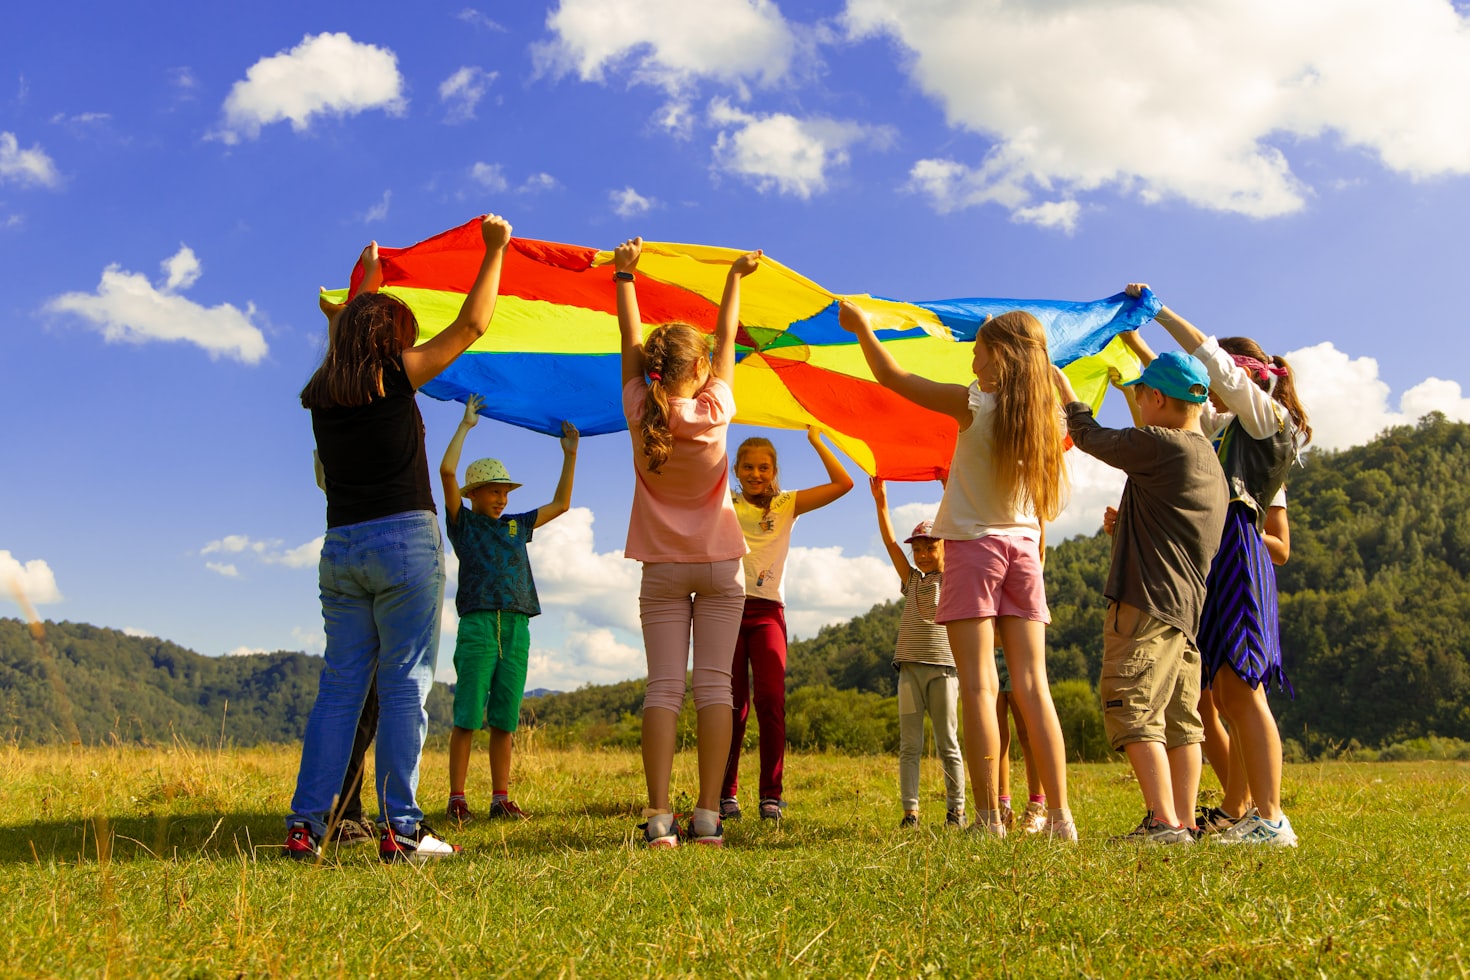 children in a field playing with a parachute